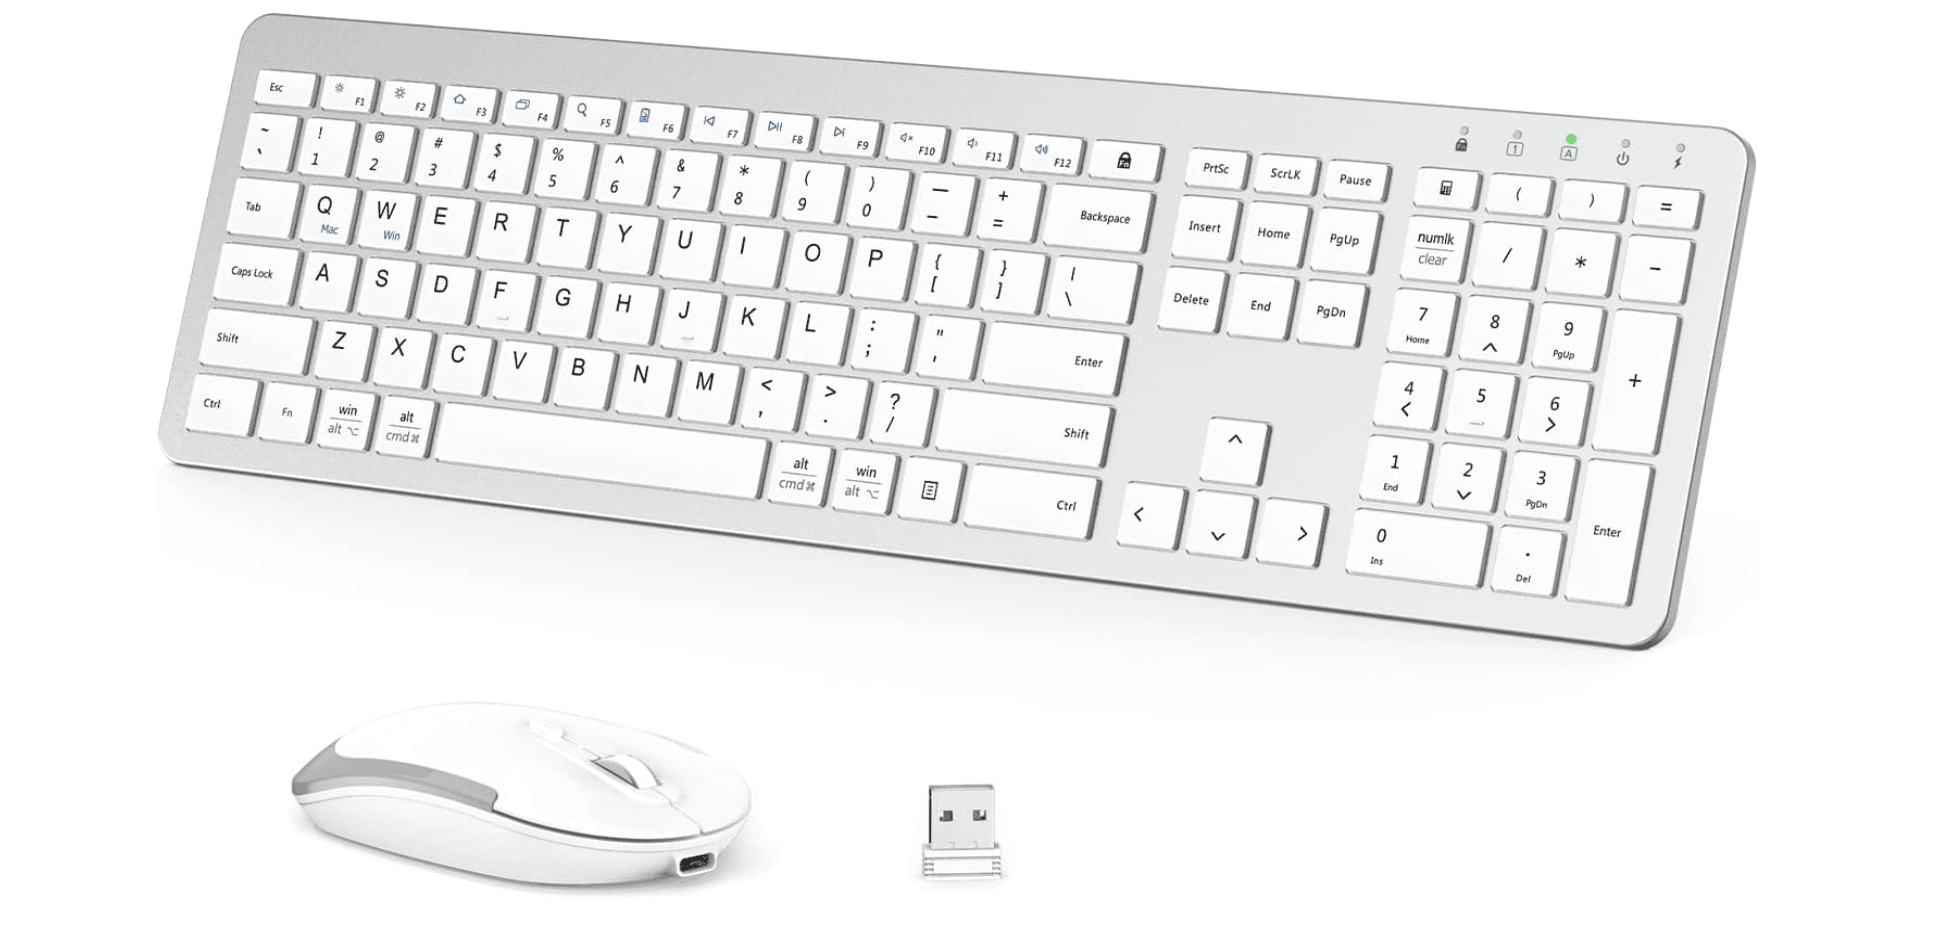 The iClever Keyboard and Mouse